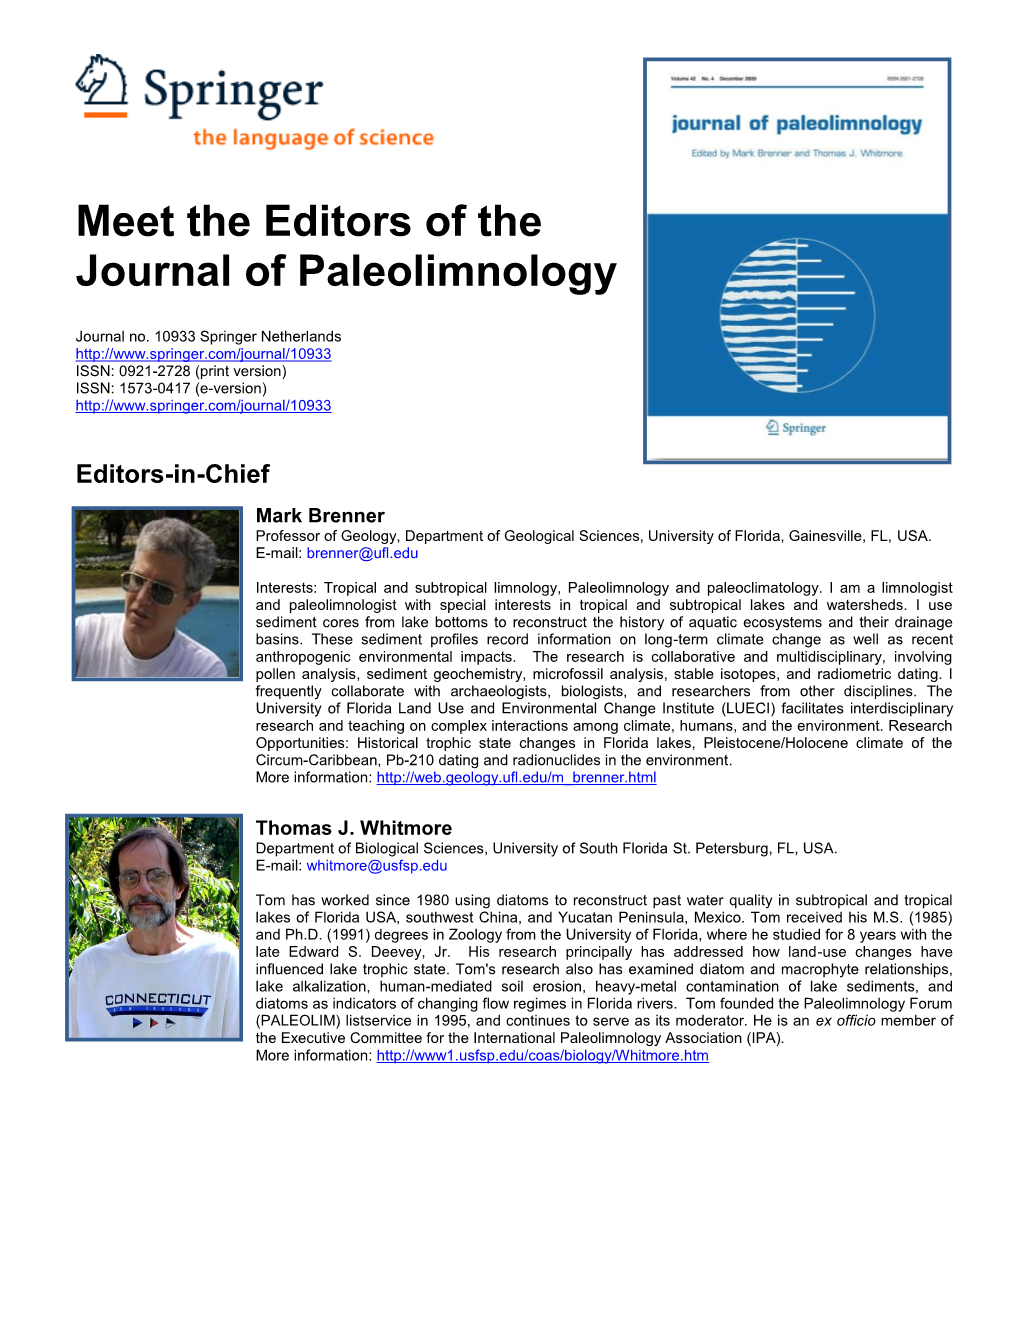 Meet the Editors of the Journal of Paleolimnology